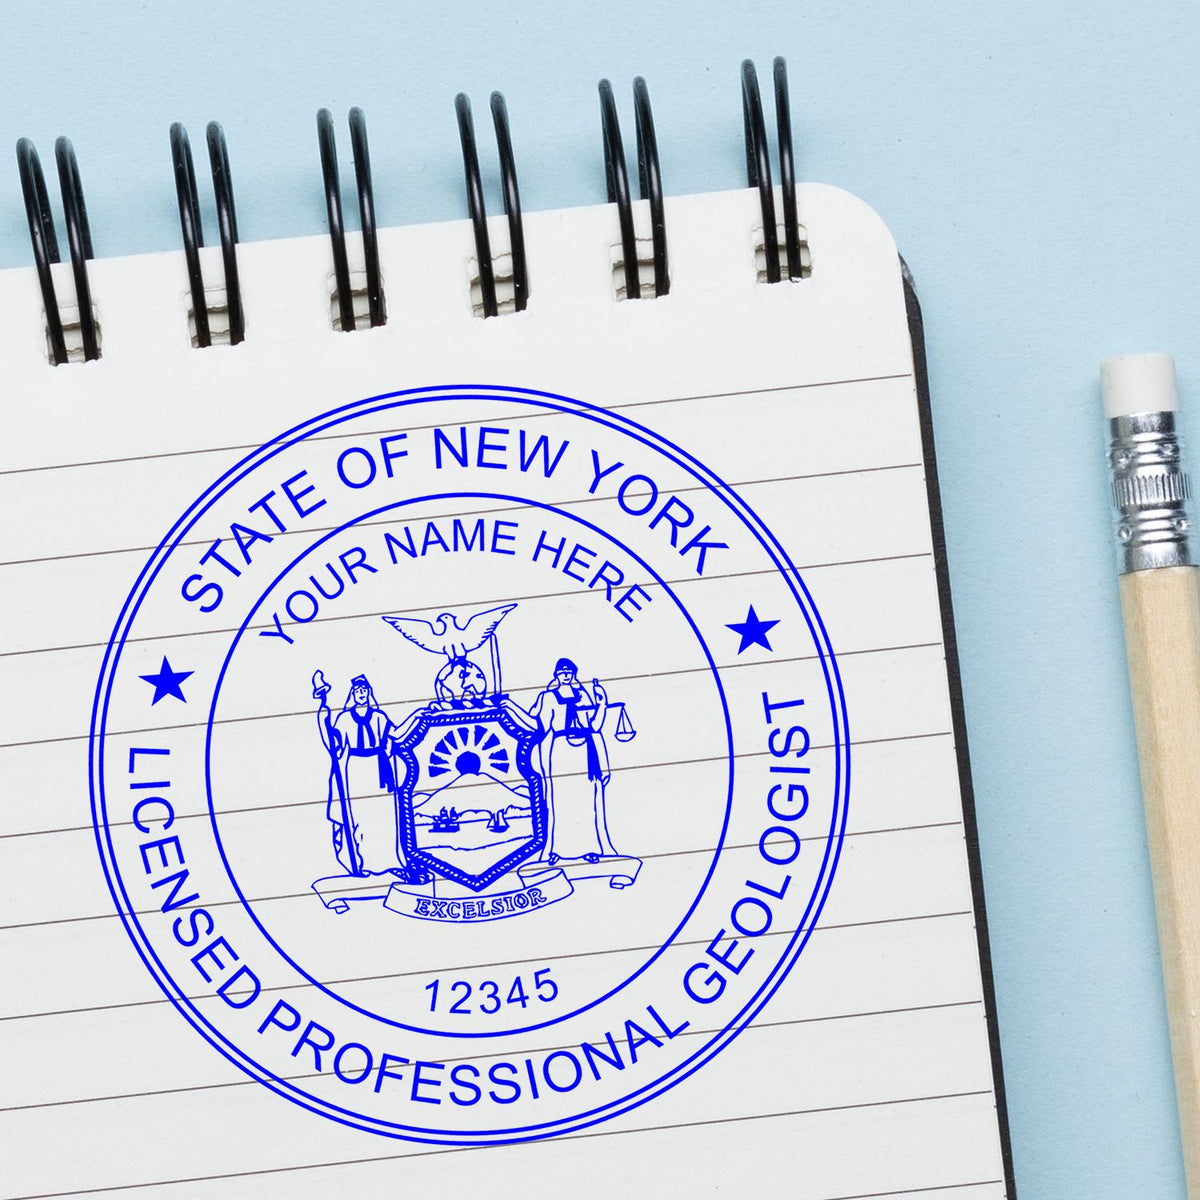 The Slim Pre-Inked New York Professional Geologist Seal Stamp stamp impression comes to life with a crisp, detailed image stamped on paper - showcasing true professional quality.